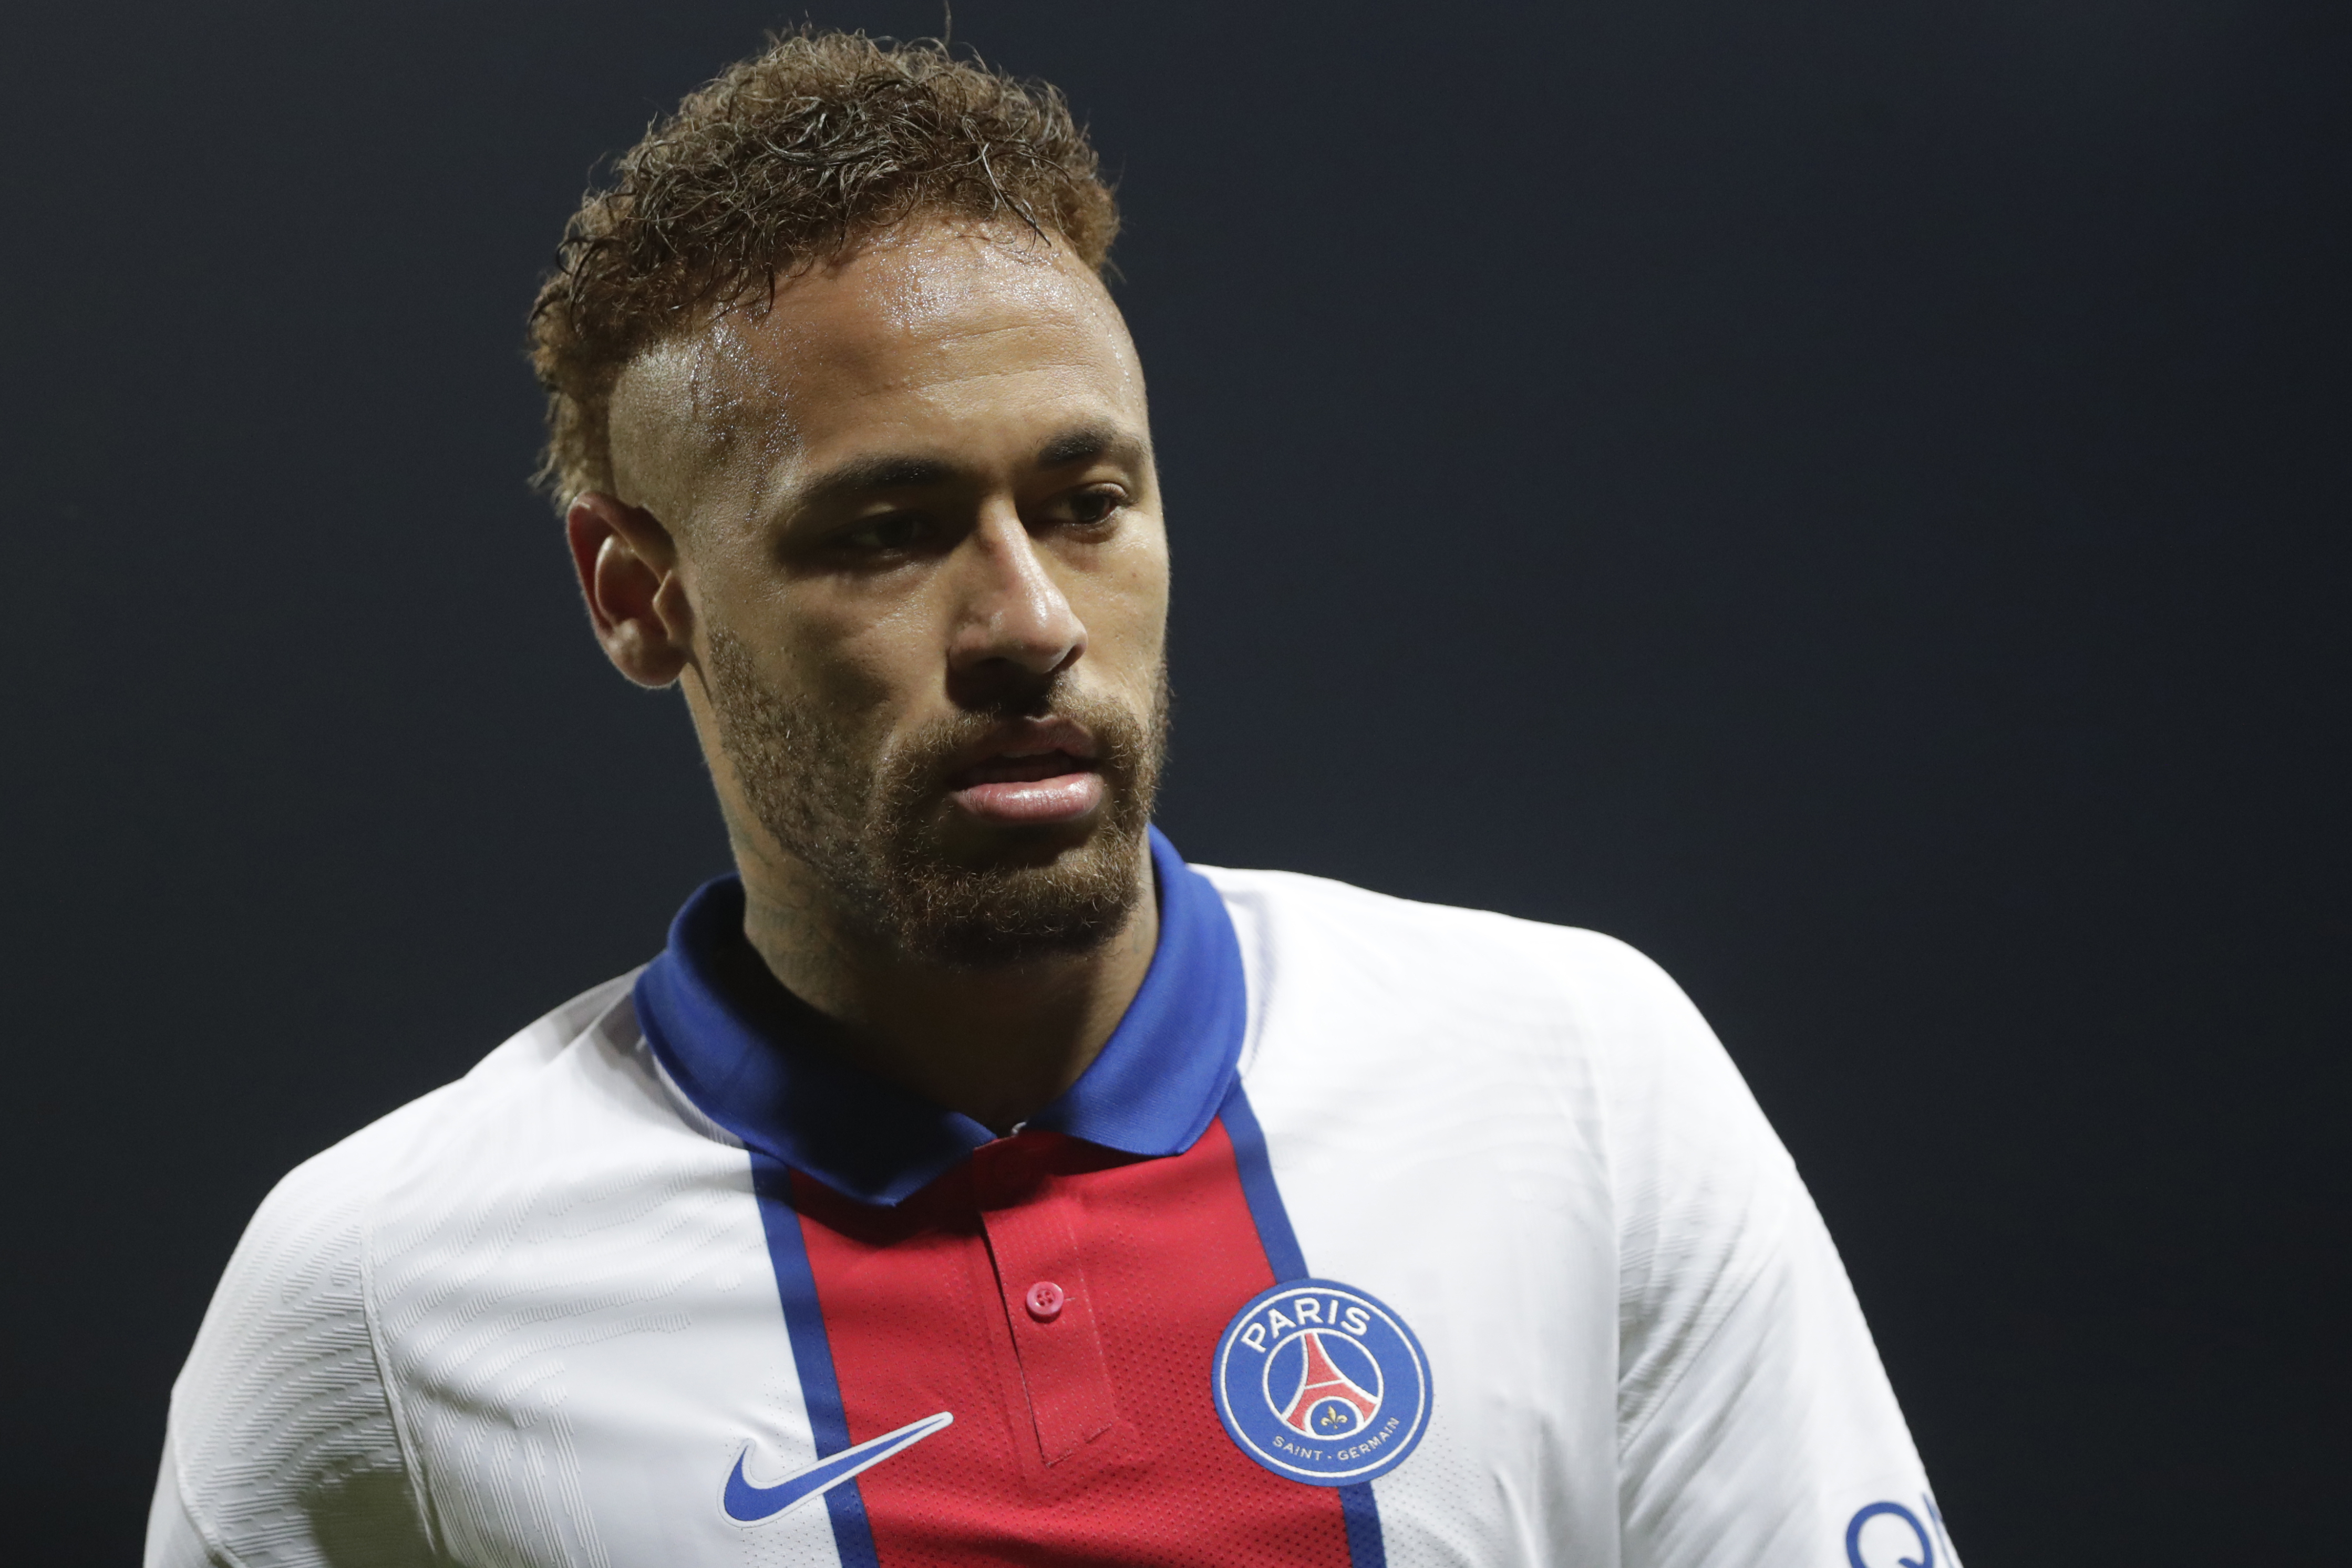 Neymar's Nike Contract Was Terminated After Employee Alleged Sexual Assault News, Highlights, Stats, and Rumors | Bleacher Report